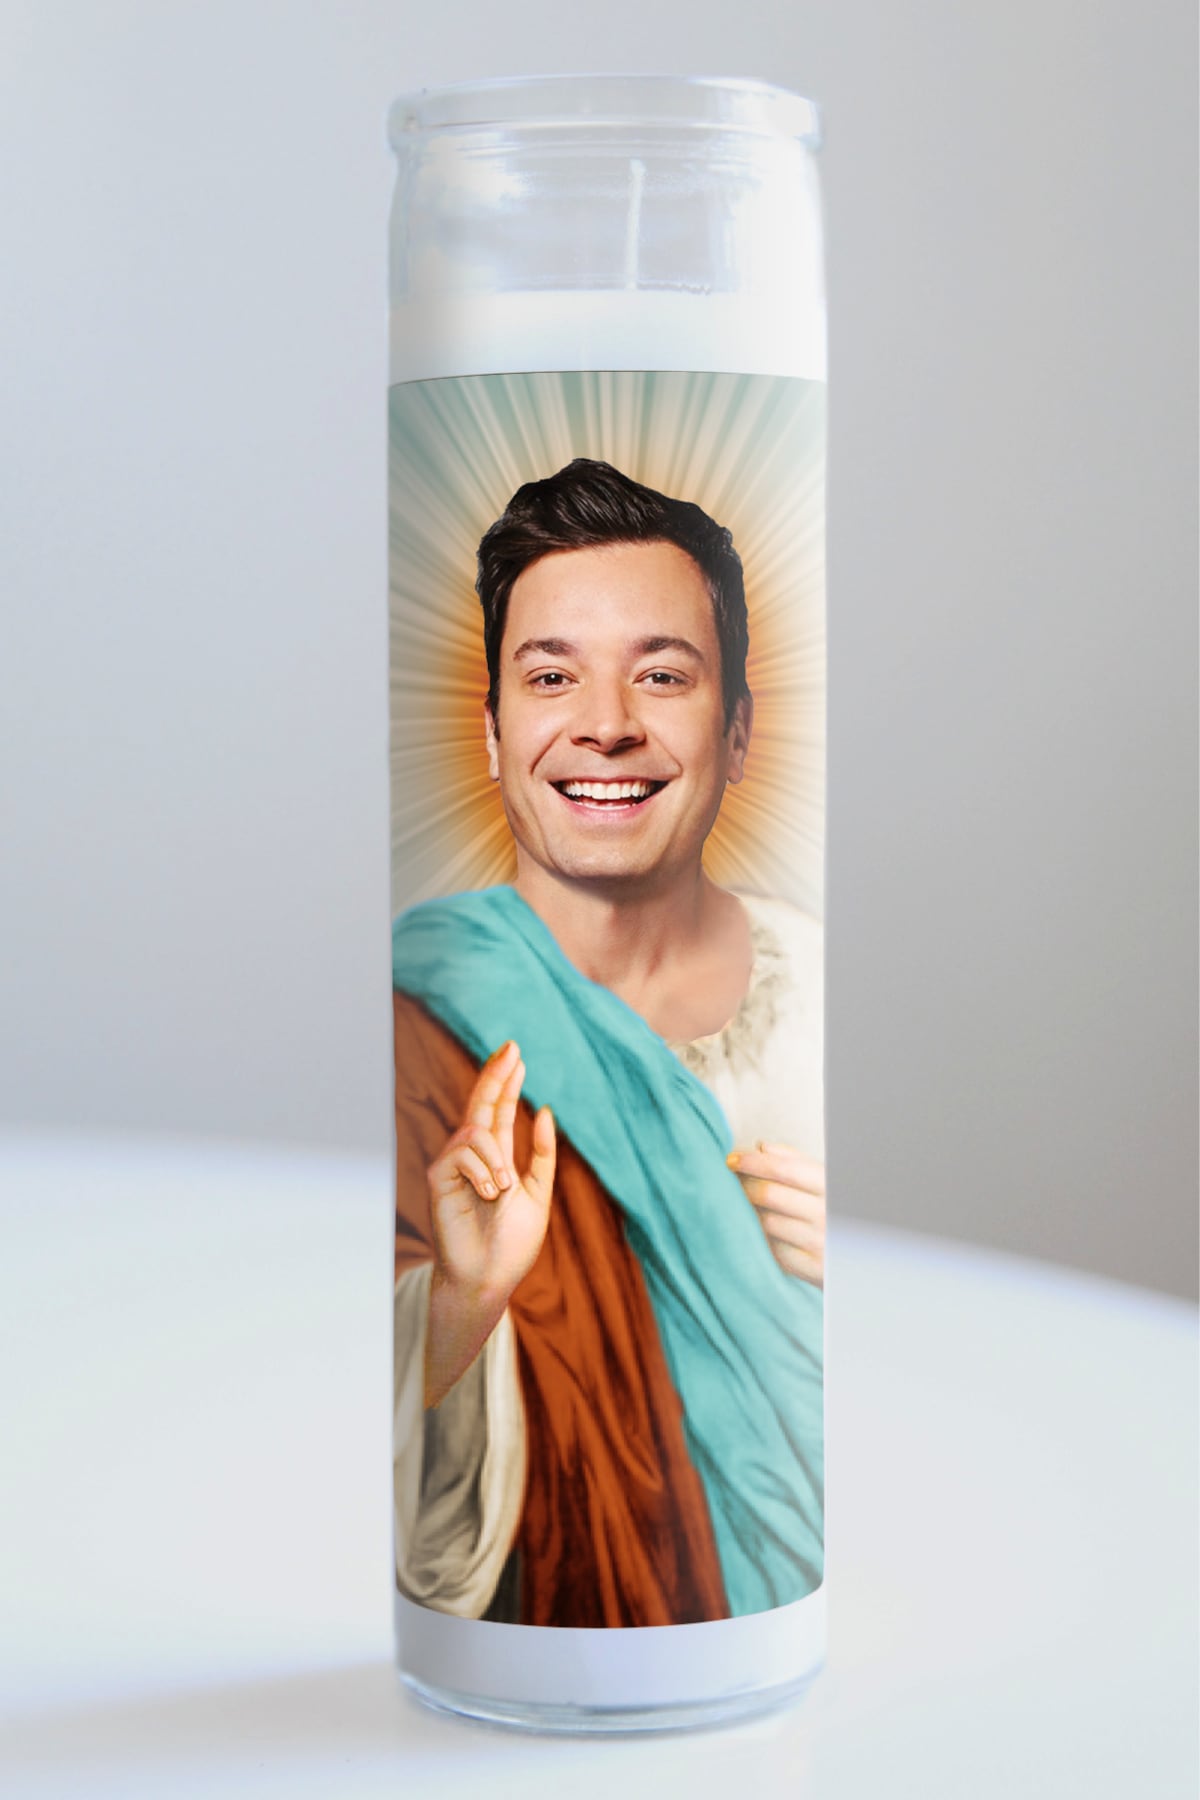 Jimmy Fallon Teal Robe Candle